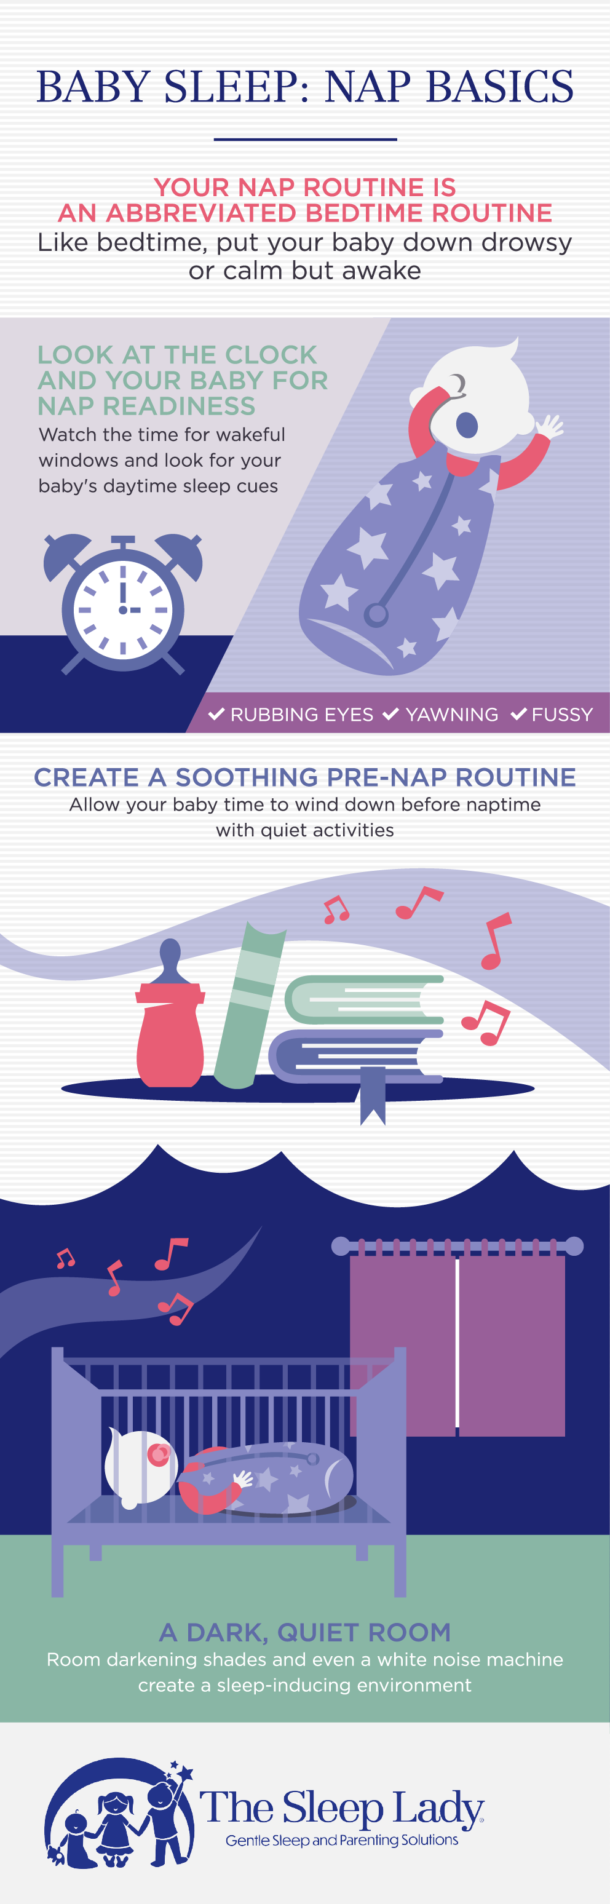 Nap Training: How to Get Good Naps for Good Nights